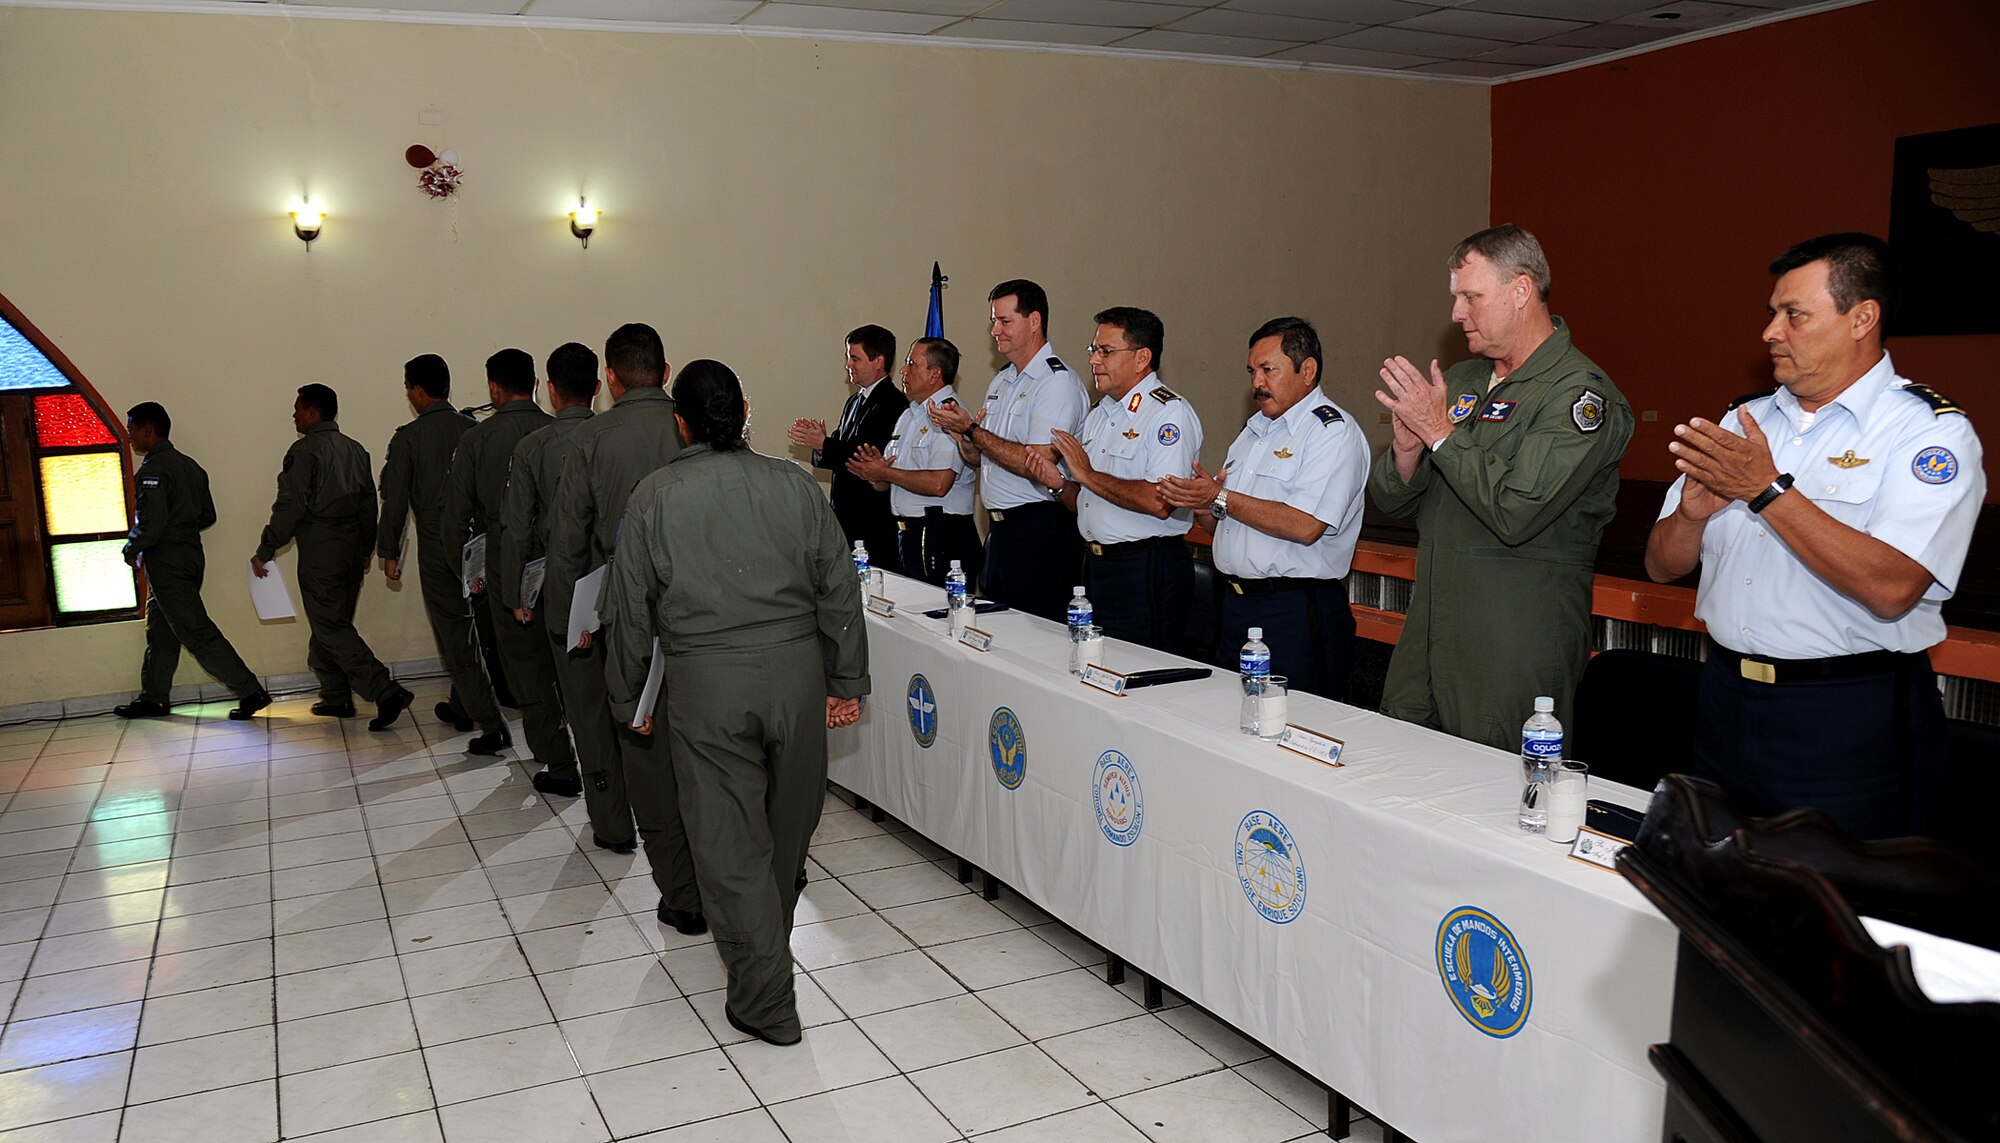 U.S. and Honduran air force senior leaders congratulate members of Honduran air force who participated in the first building partner capacity mission between the two nations during the closing ceremony, Tegucigalpa, Honduras, Feb. 23.  The 571st's mission supports 12th Air Force's (Air Forces Southern) continued engagements in the U.S. Southern Command area of responsibility of Latin America and the Caribbean.  (U.S. Air Force photo by Tech. Sgt. Lesley Waters)